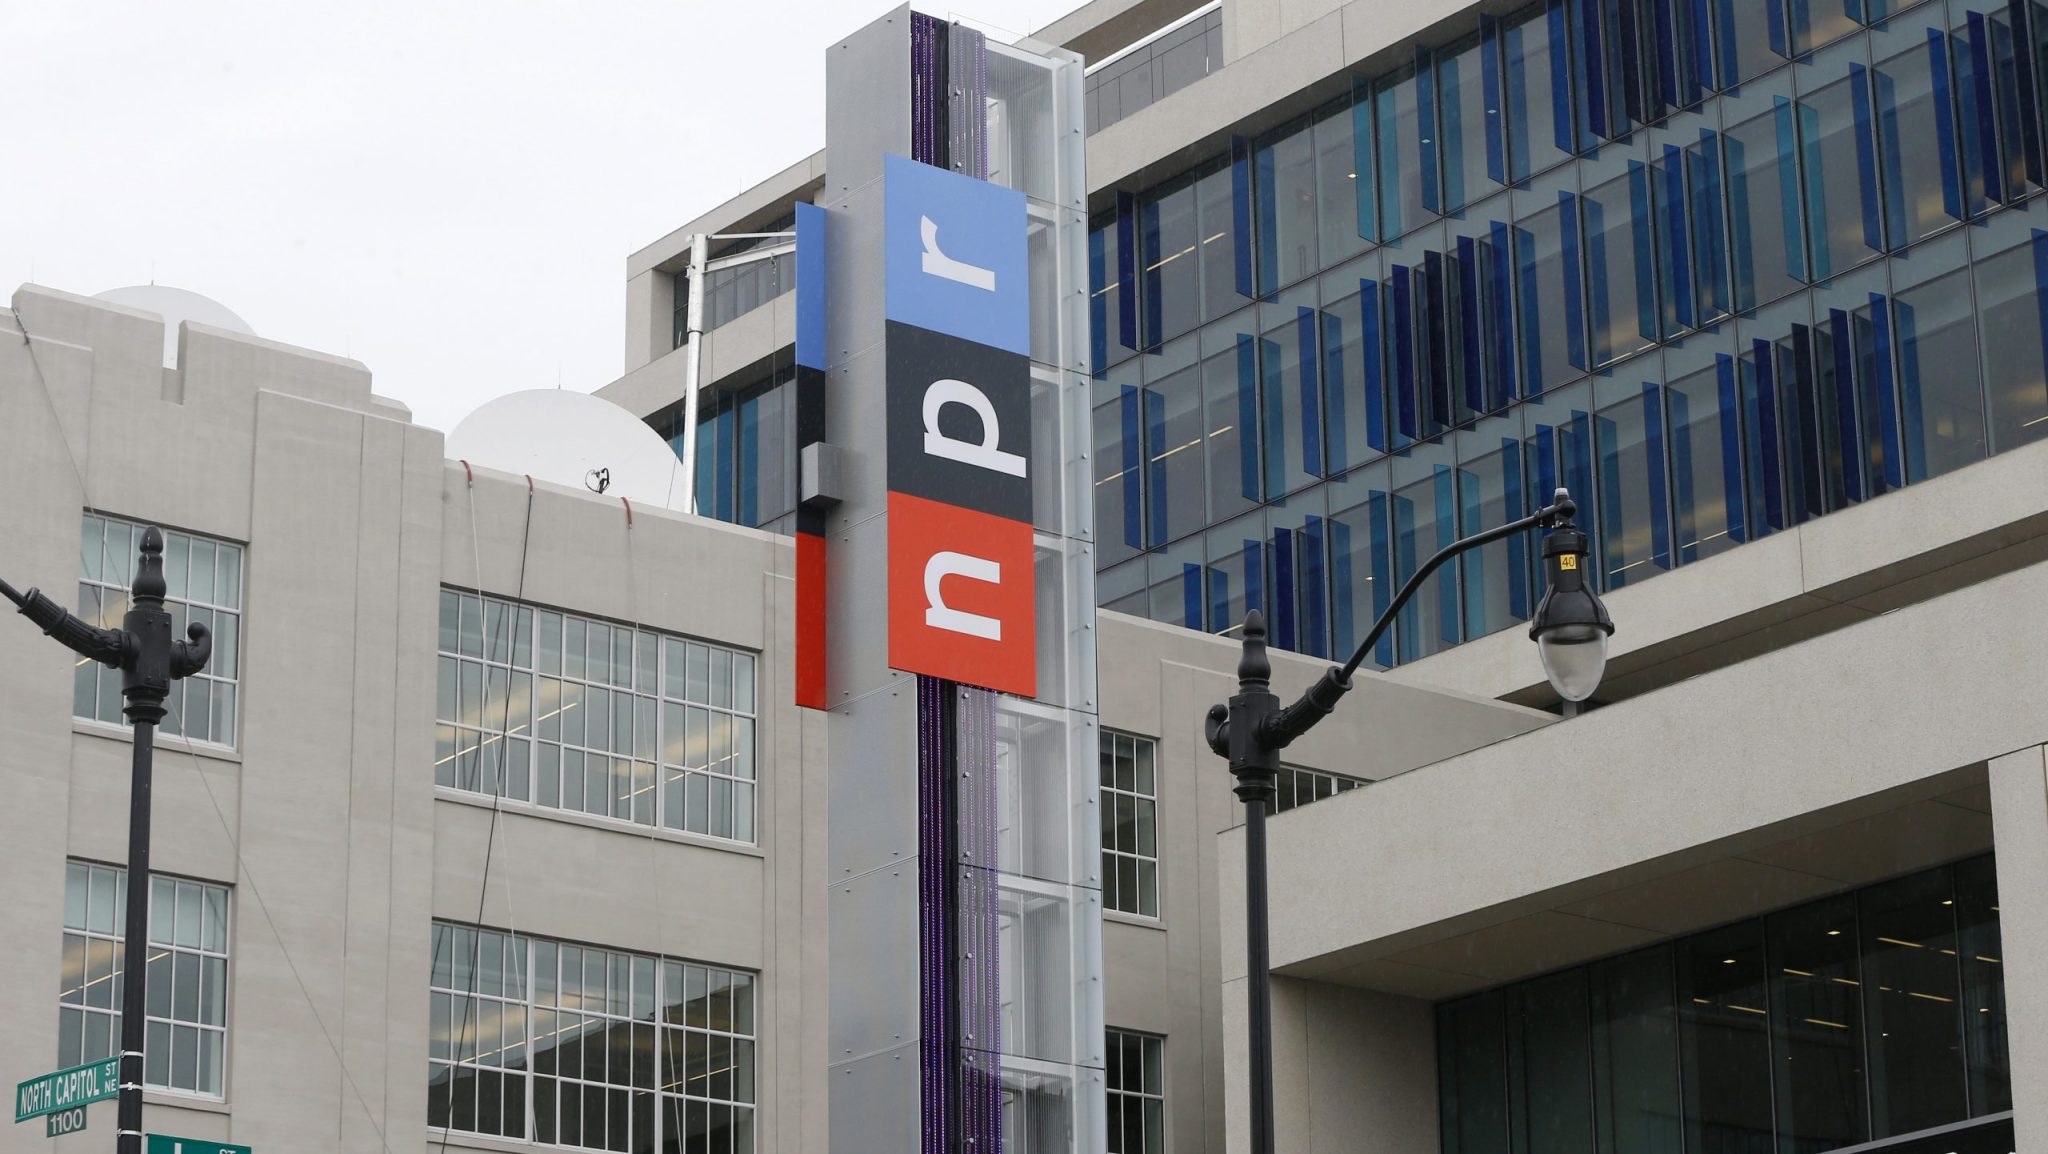 FILE - The headquarters for National Public Radio (NPR) stands on North Capitol Street, April 15, 2013, in Washington.